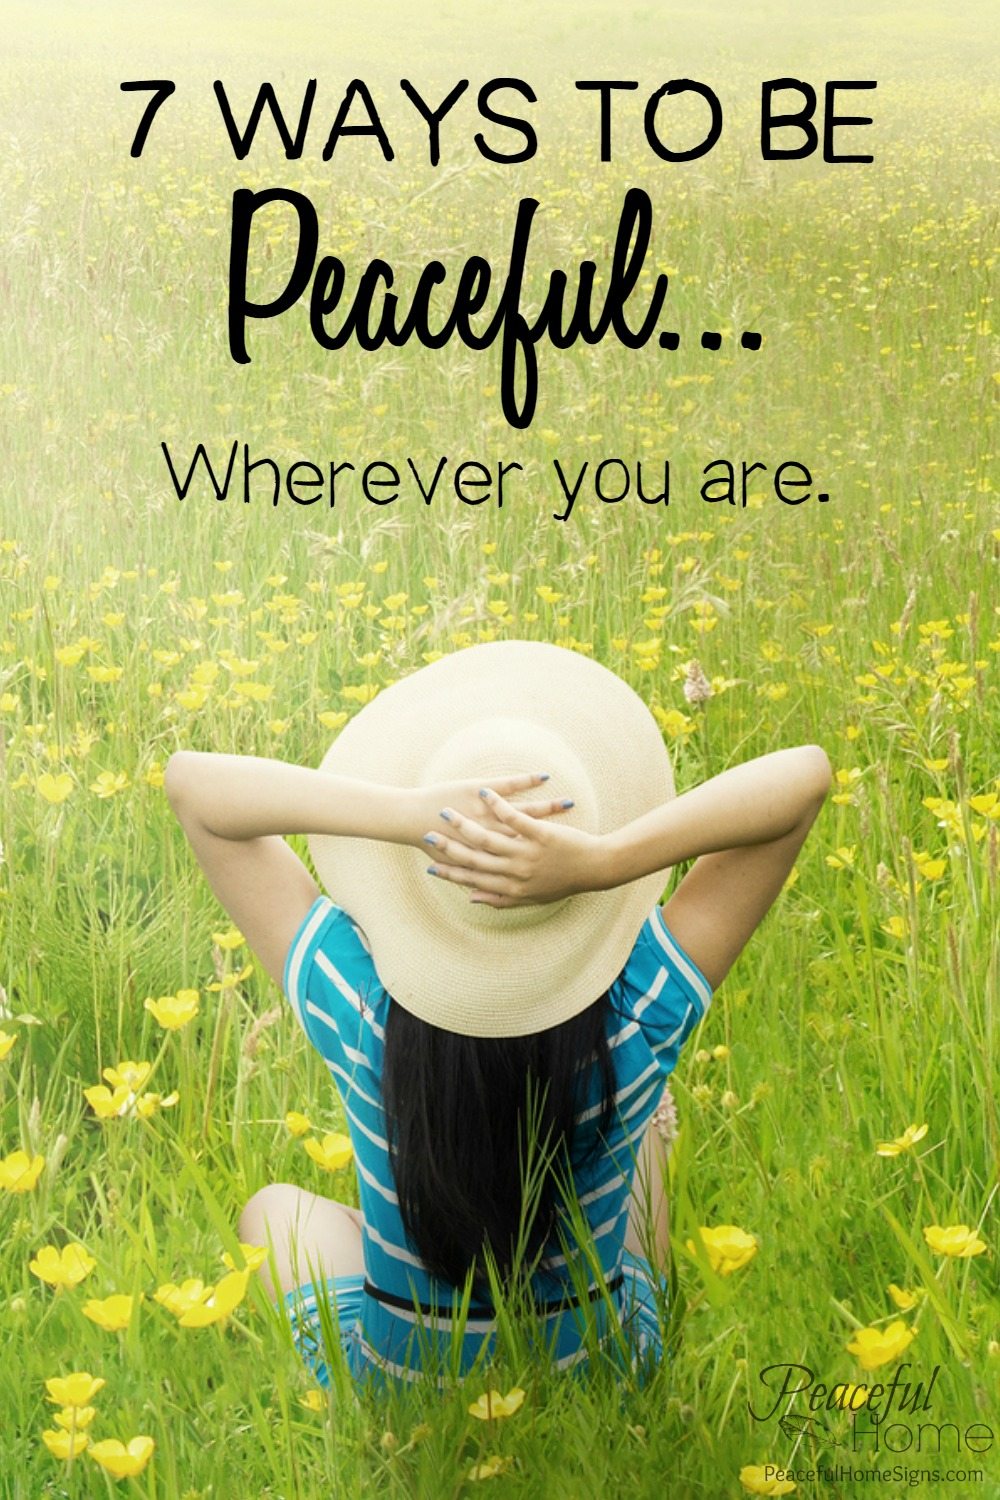 7 ways to be peaceful wherever you are | How to stay peaceful | Christian blogger | Faith based guide to staying peaceful